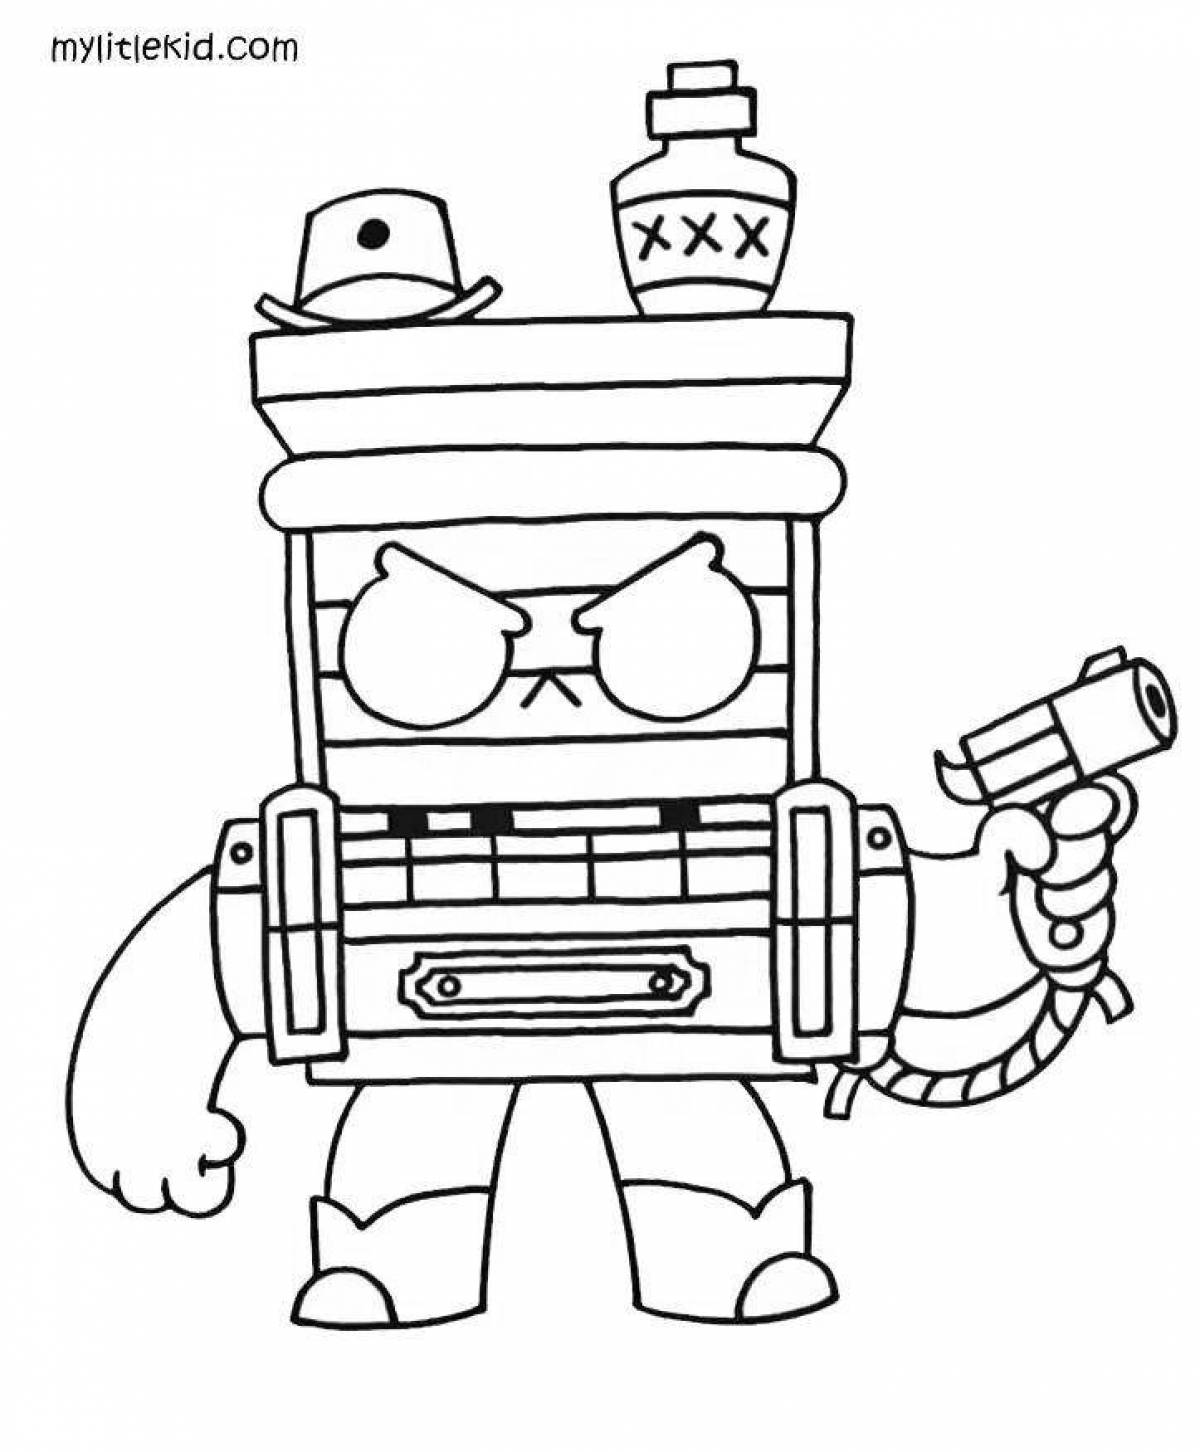 Great coloring book from brawl stars 8 bit